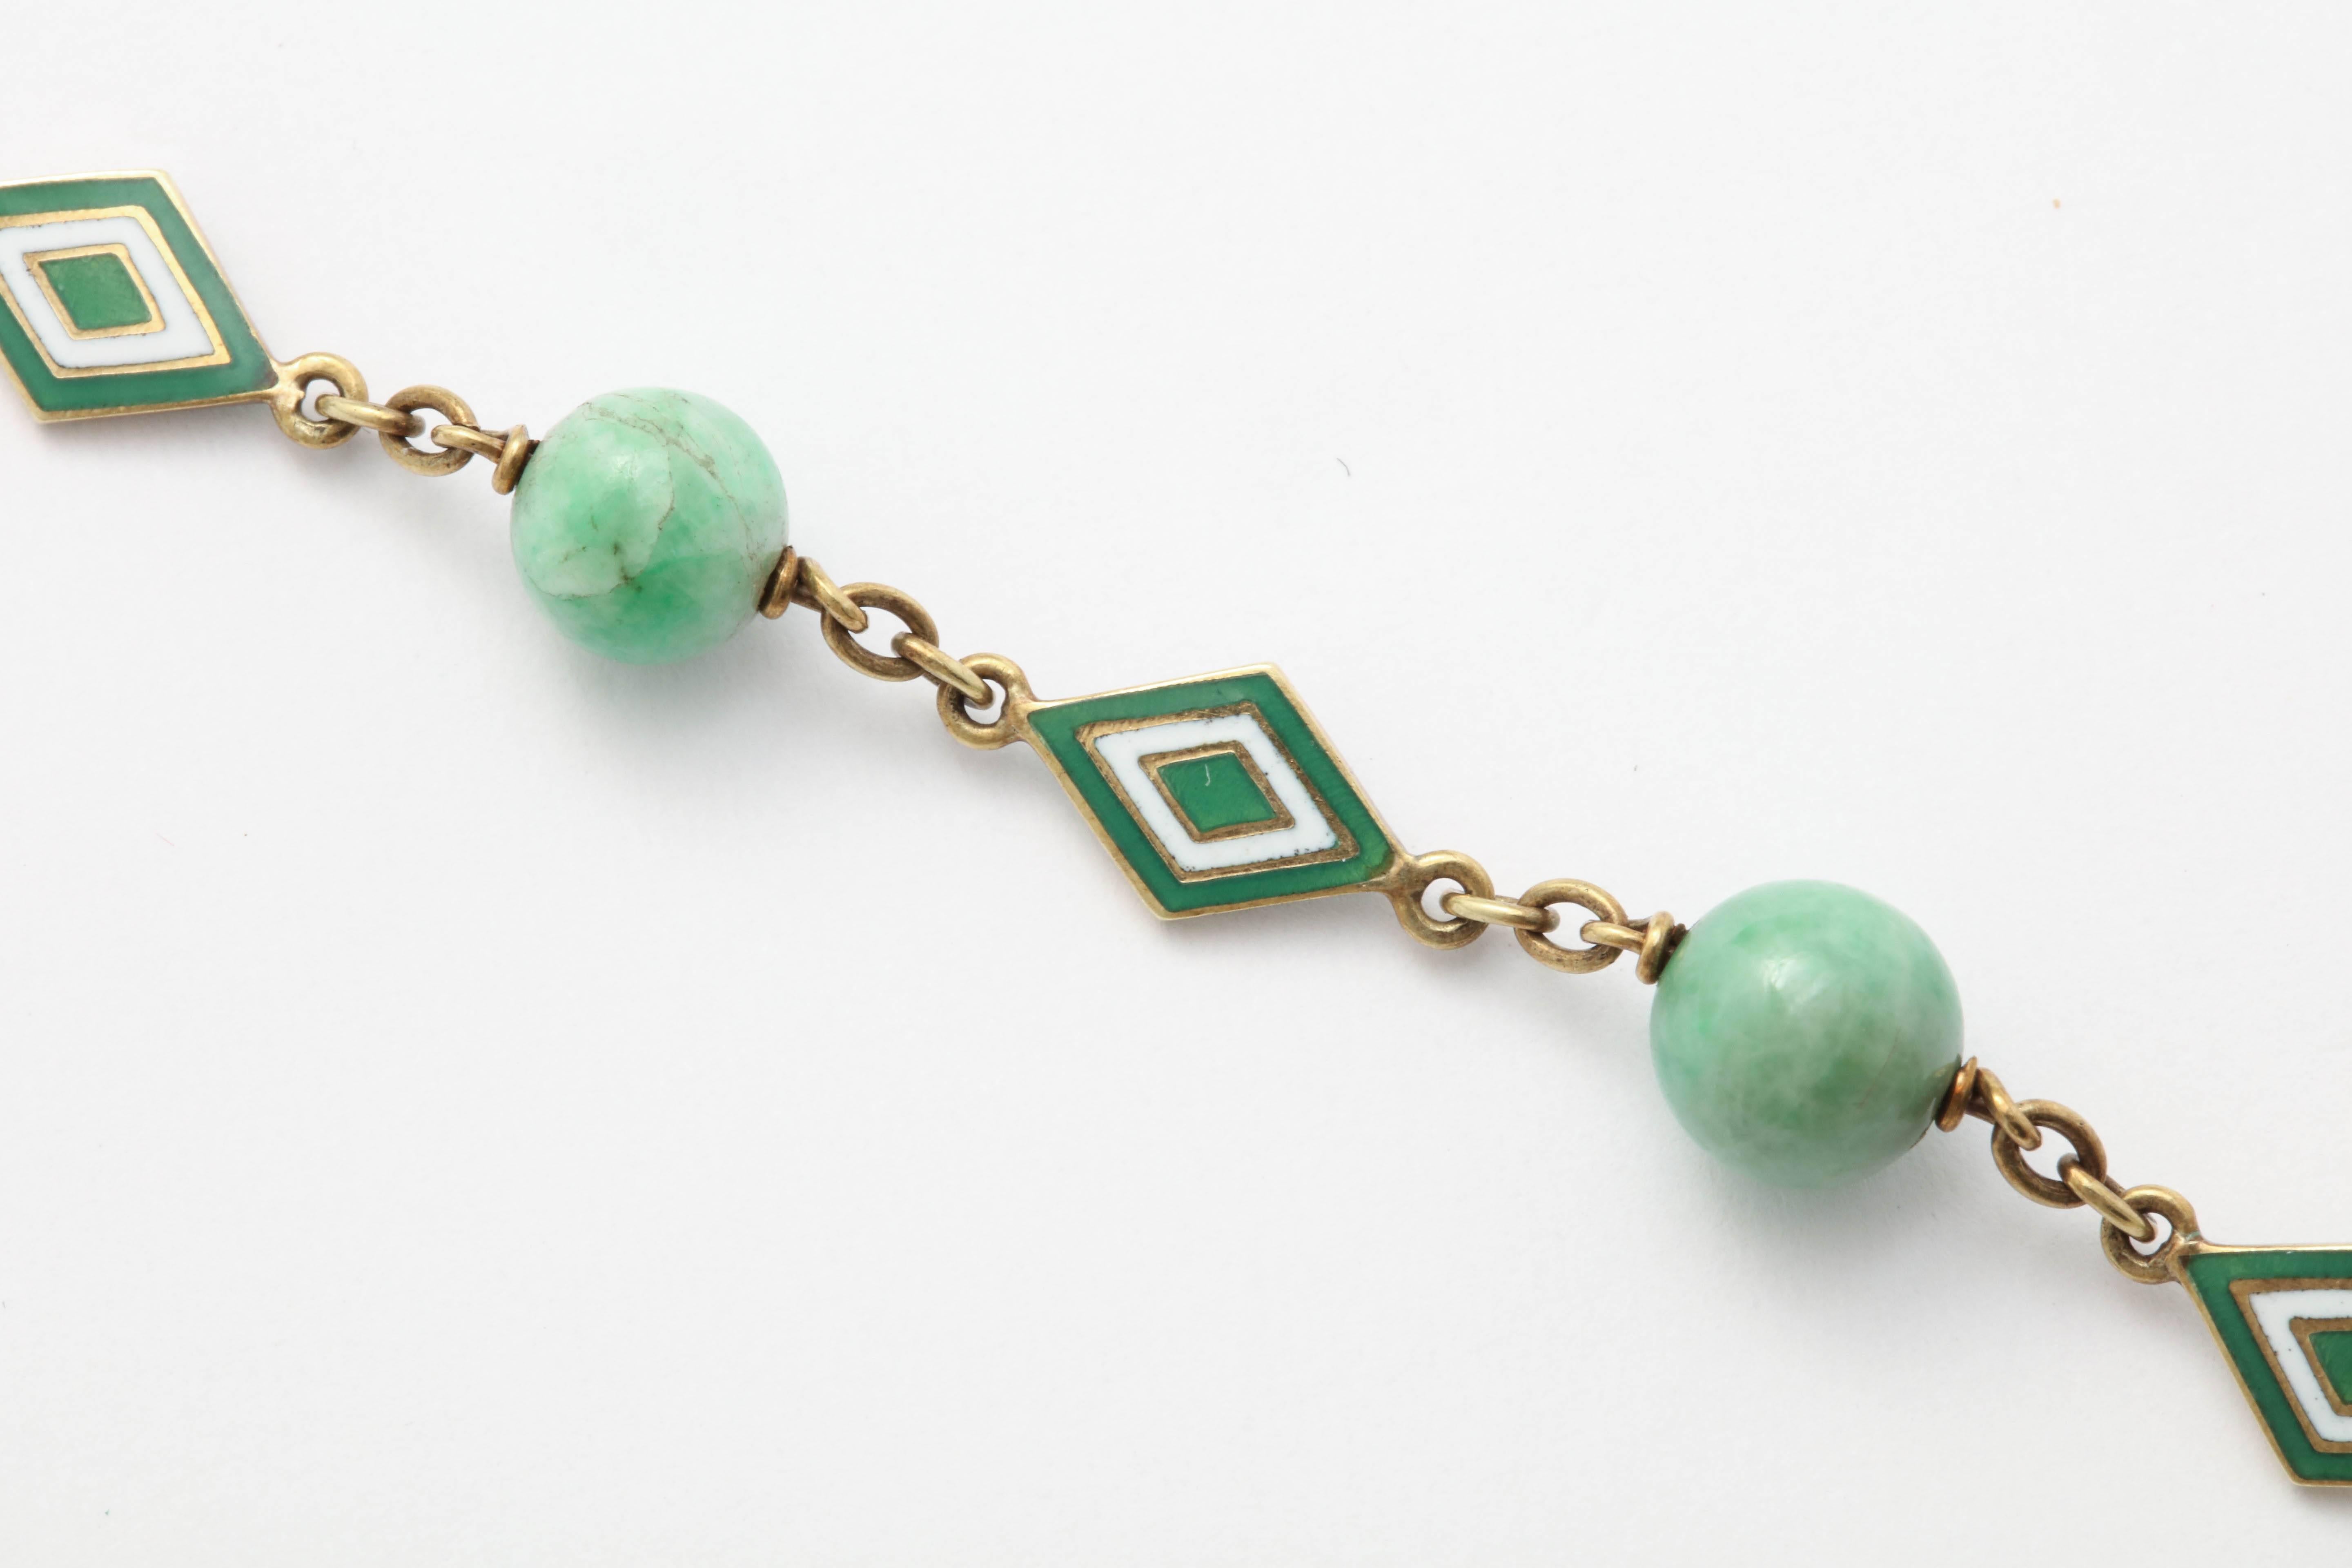 Jade and Enamel Art Deco Bracelet with Diamond Monogram Charm In Excellent Condition For Sale In New York, NY